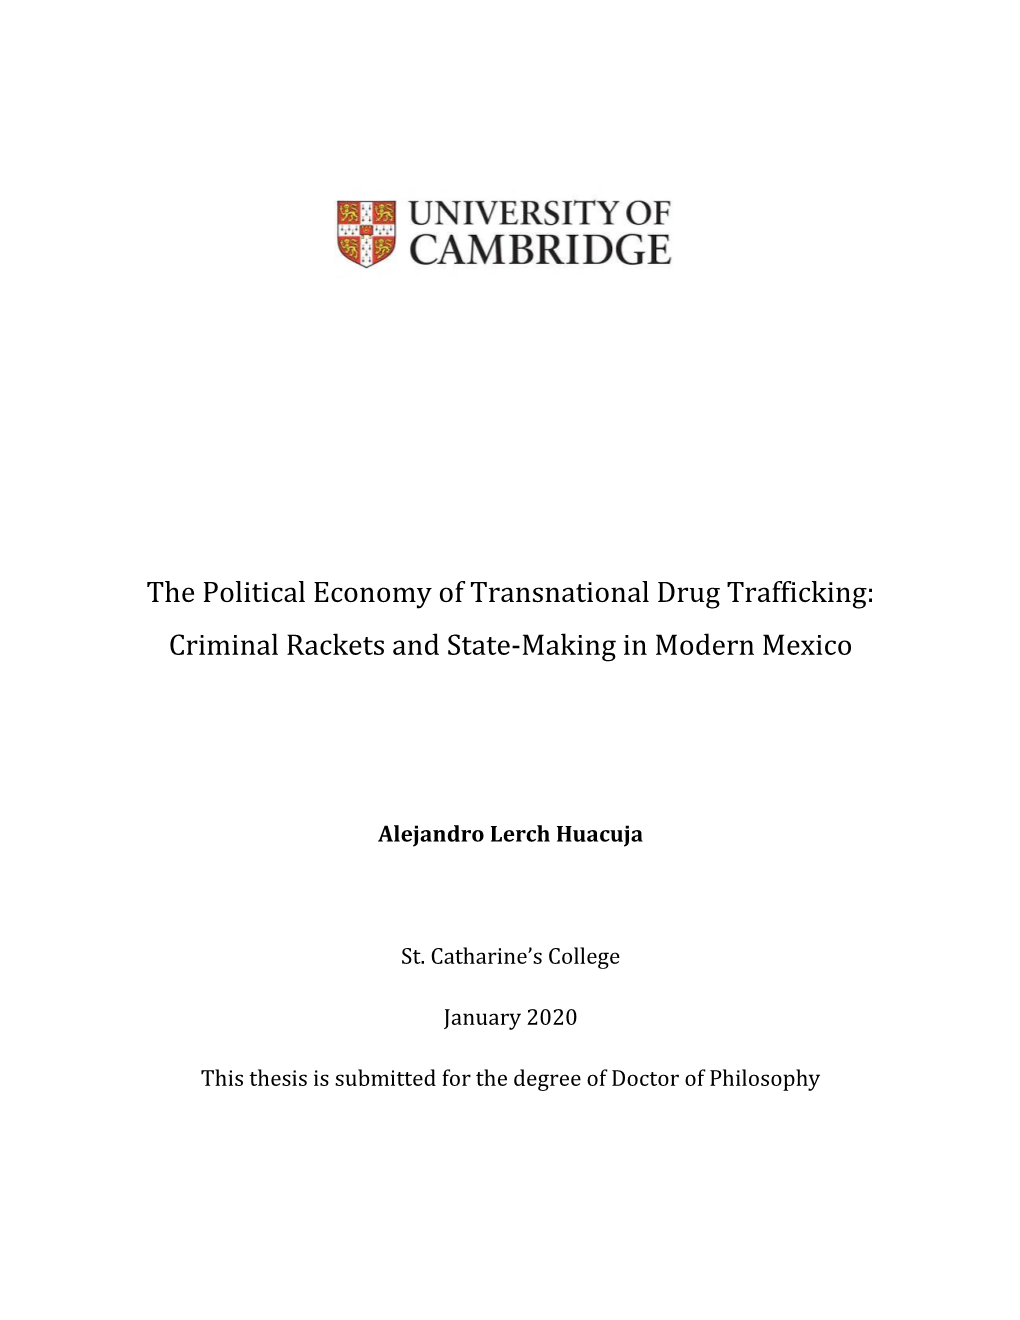 The Political Economy of Transnational Drug Trafficking: Criminal Rackets and State-Making in Modern Mexico